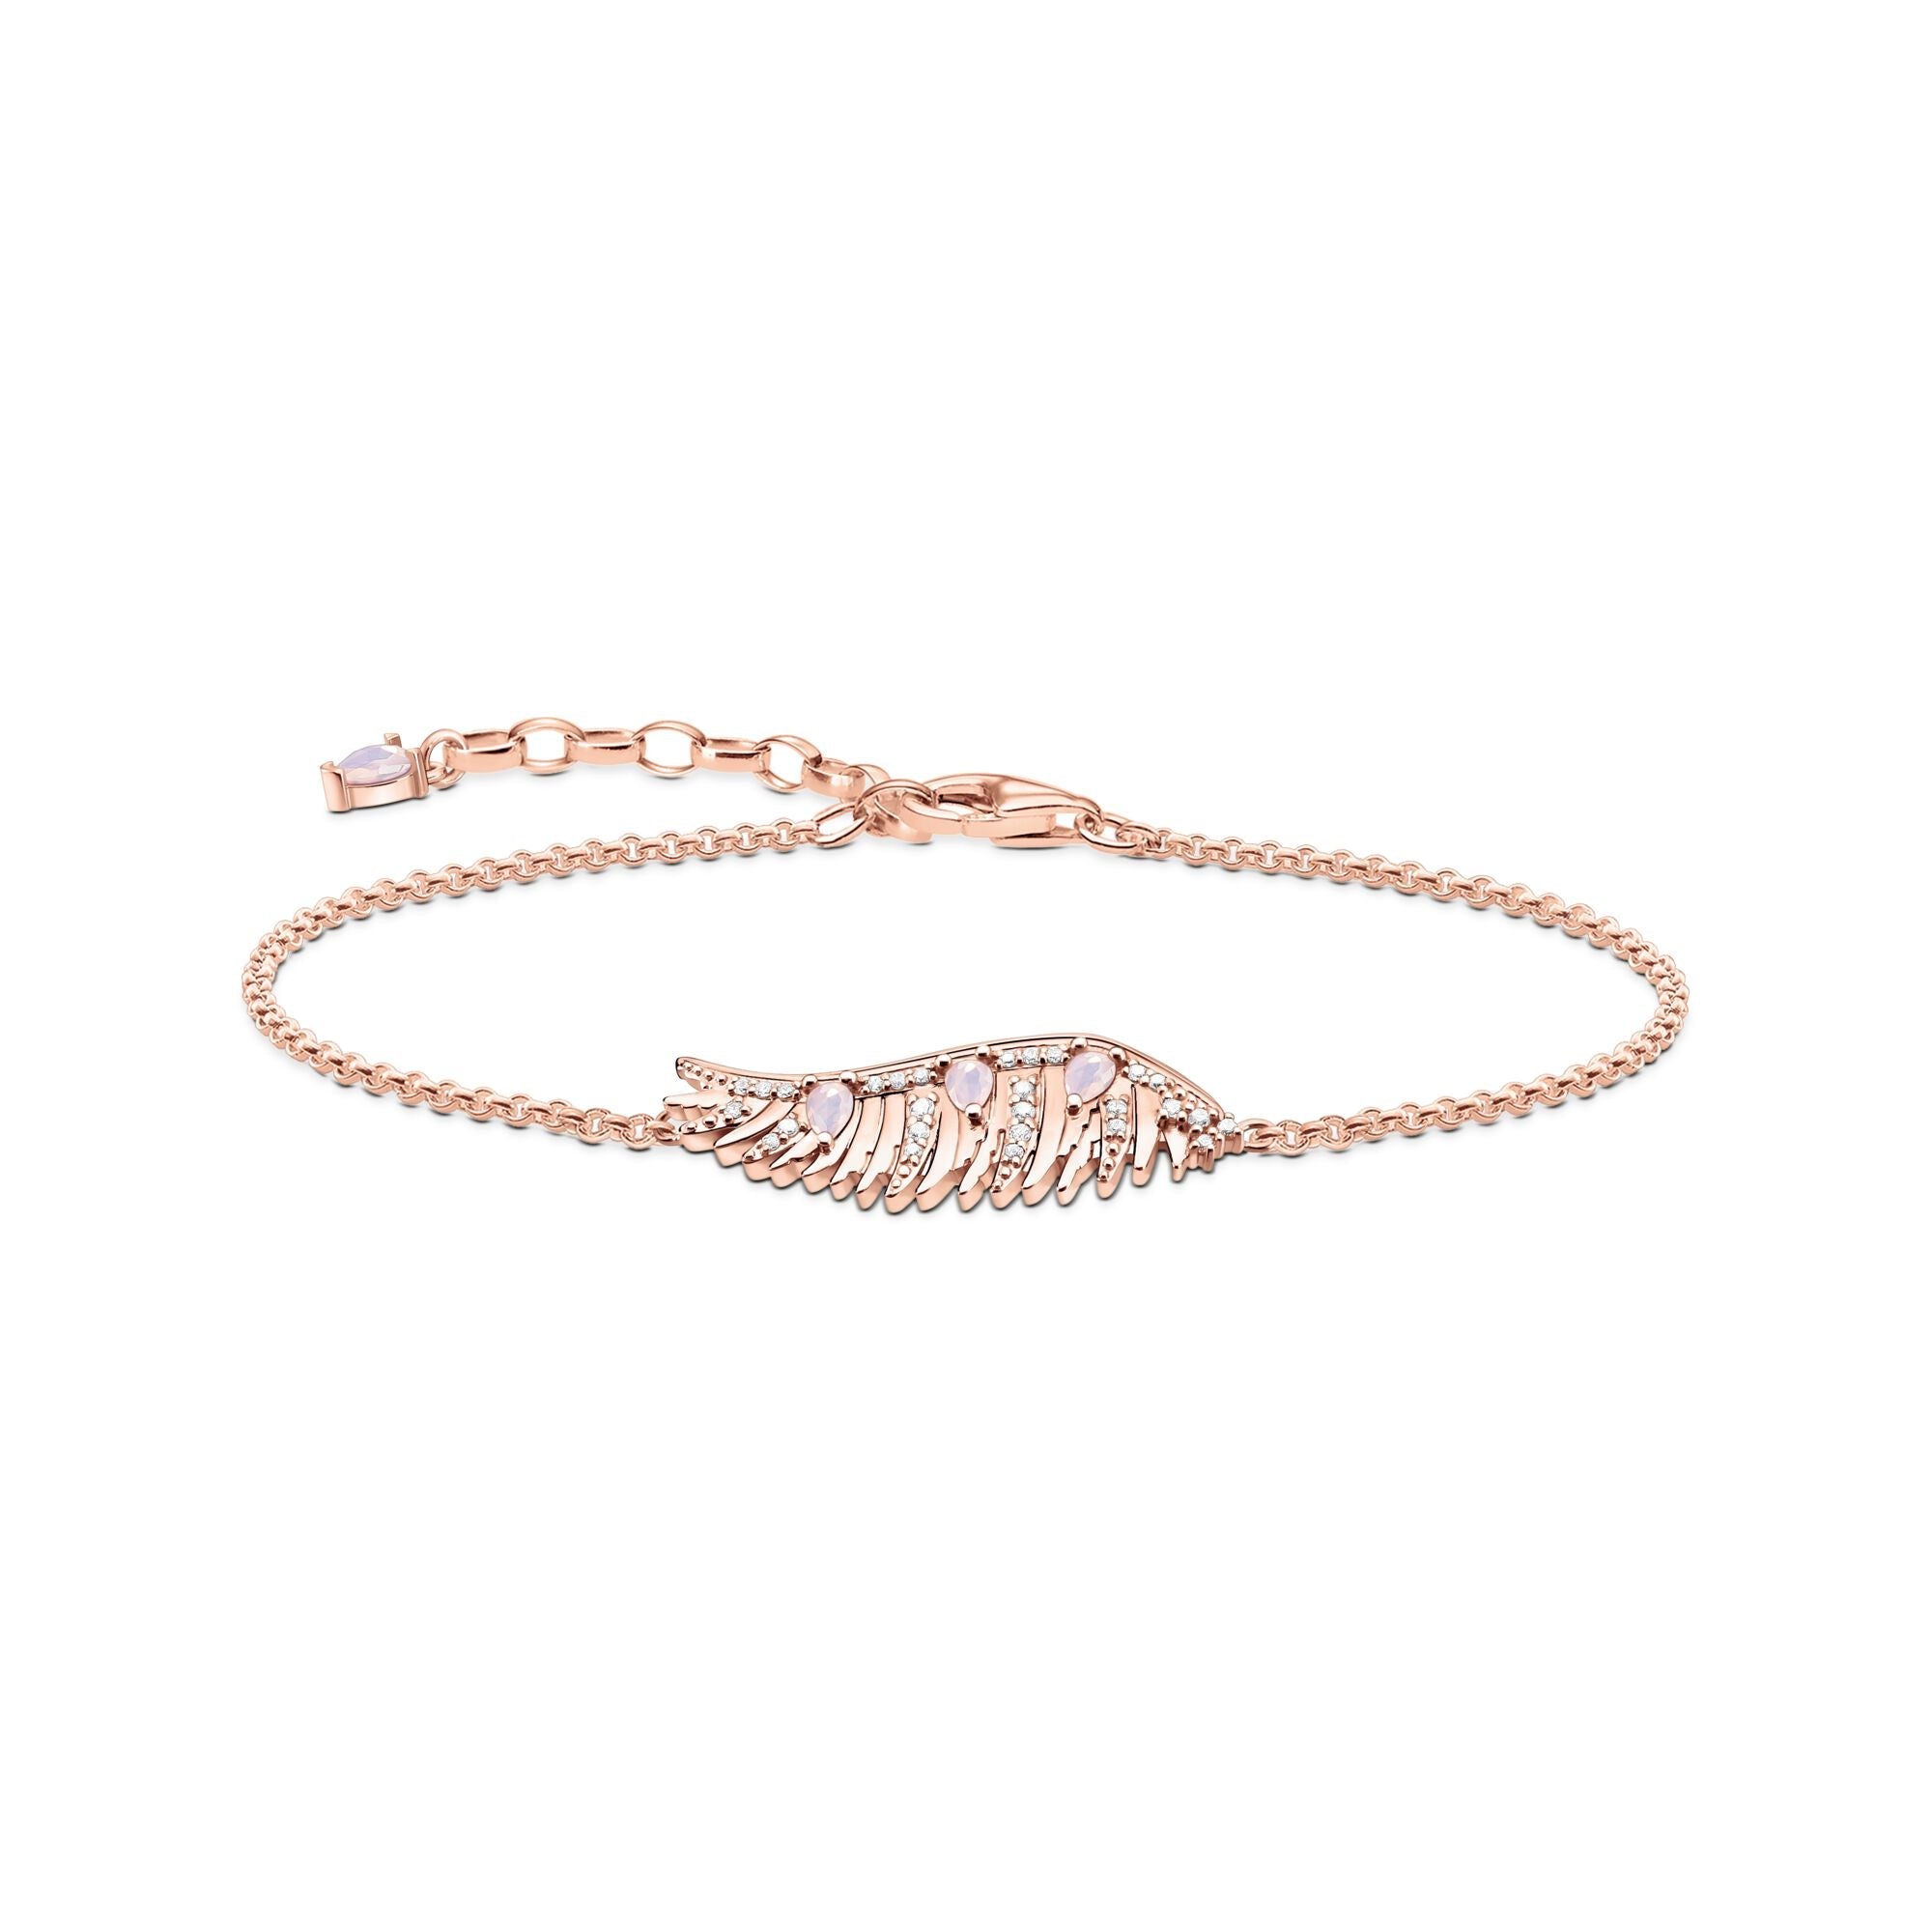 Thomas Sabo Rose Gold Plated Sterling Silver Phoenix Wing Pink Stones Bracelet